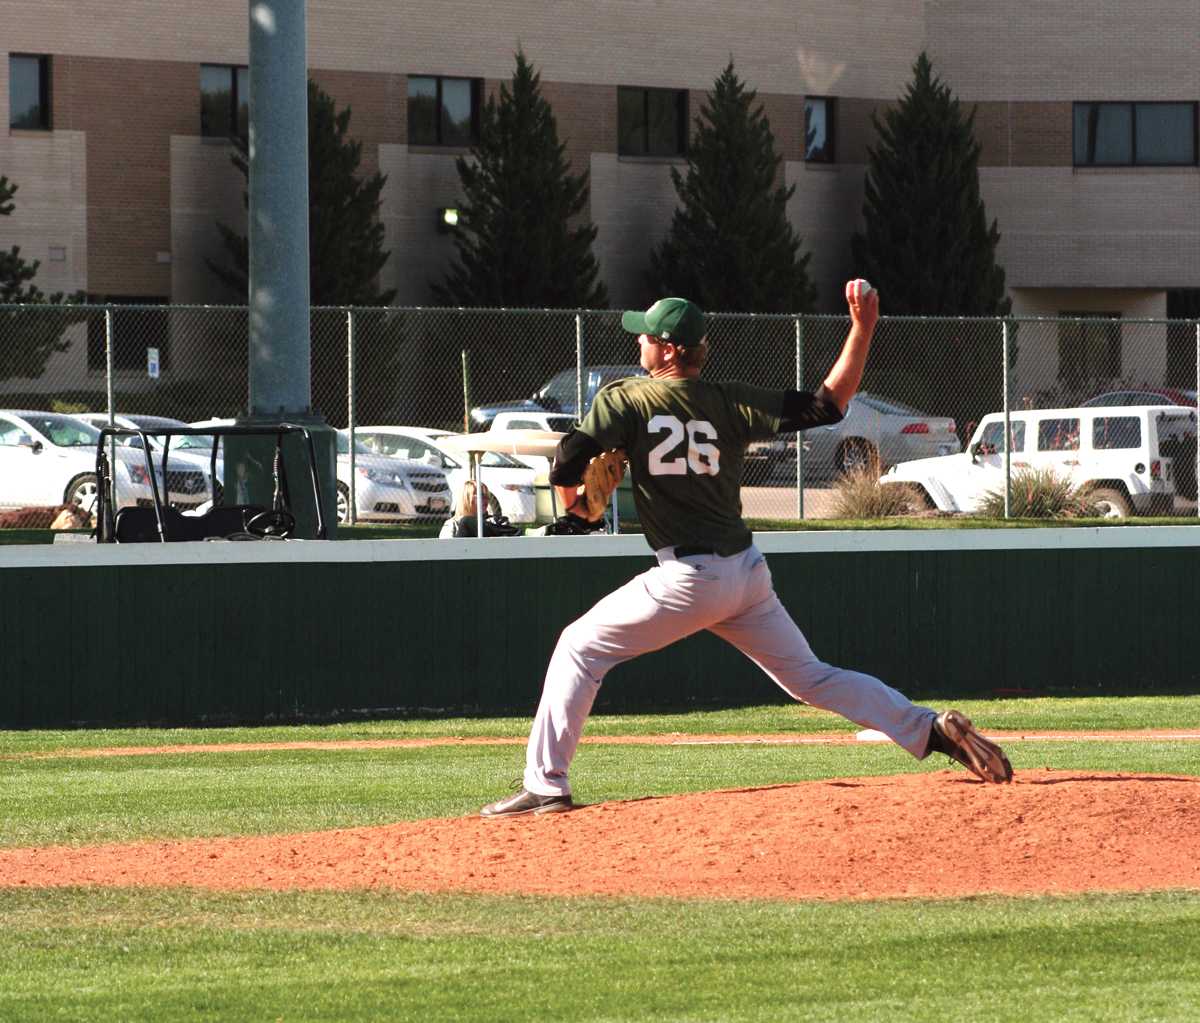 Crusader photo/Efren Rivero
Chris Juracek pitches against Garden City Community College last Friday. Juracek pitched for a couple of innings during the fall scrimmage. The Saints will play again in Liberal on the Oct. 17 against Frank Phillips College.